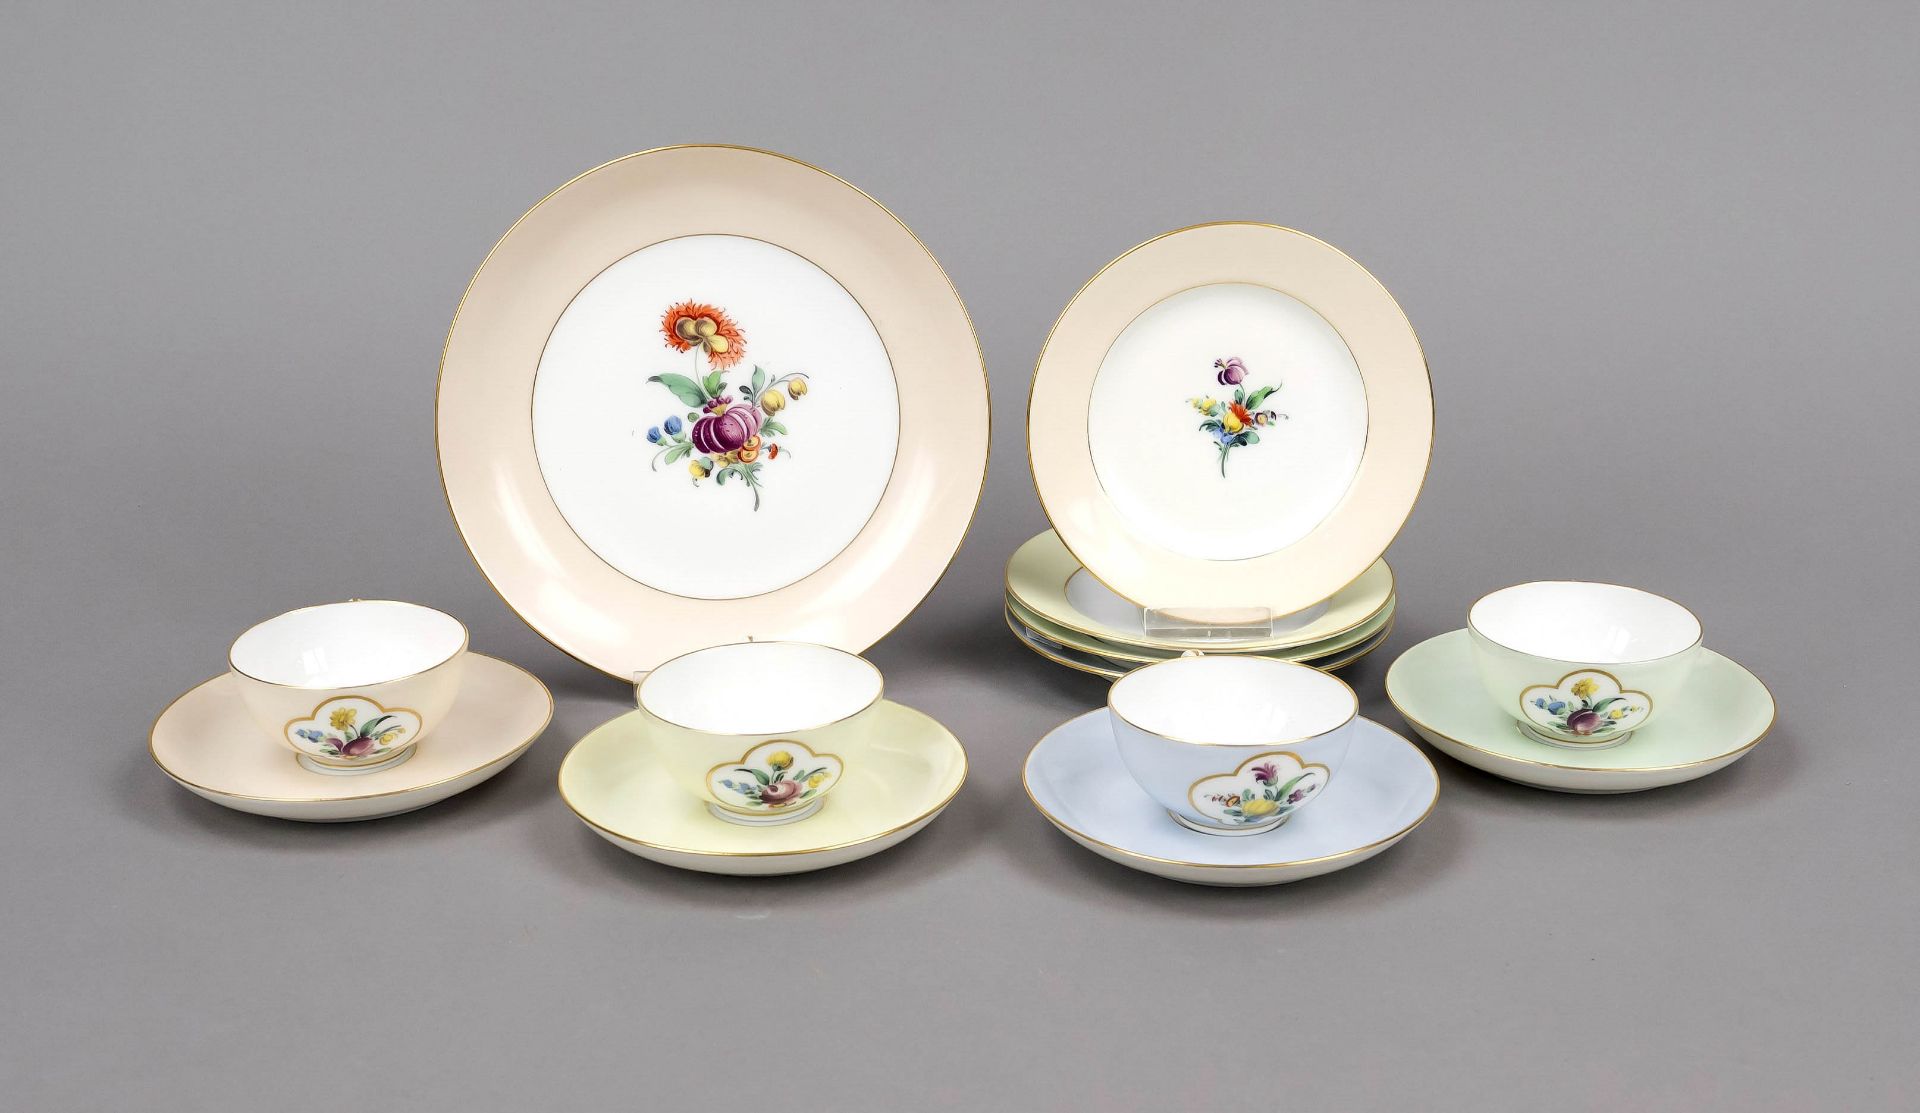 Four mocha place settings, 13 pieces, Nymphenburg, marks 1925-1975, 4 mocha cups with saucer, h. 4